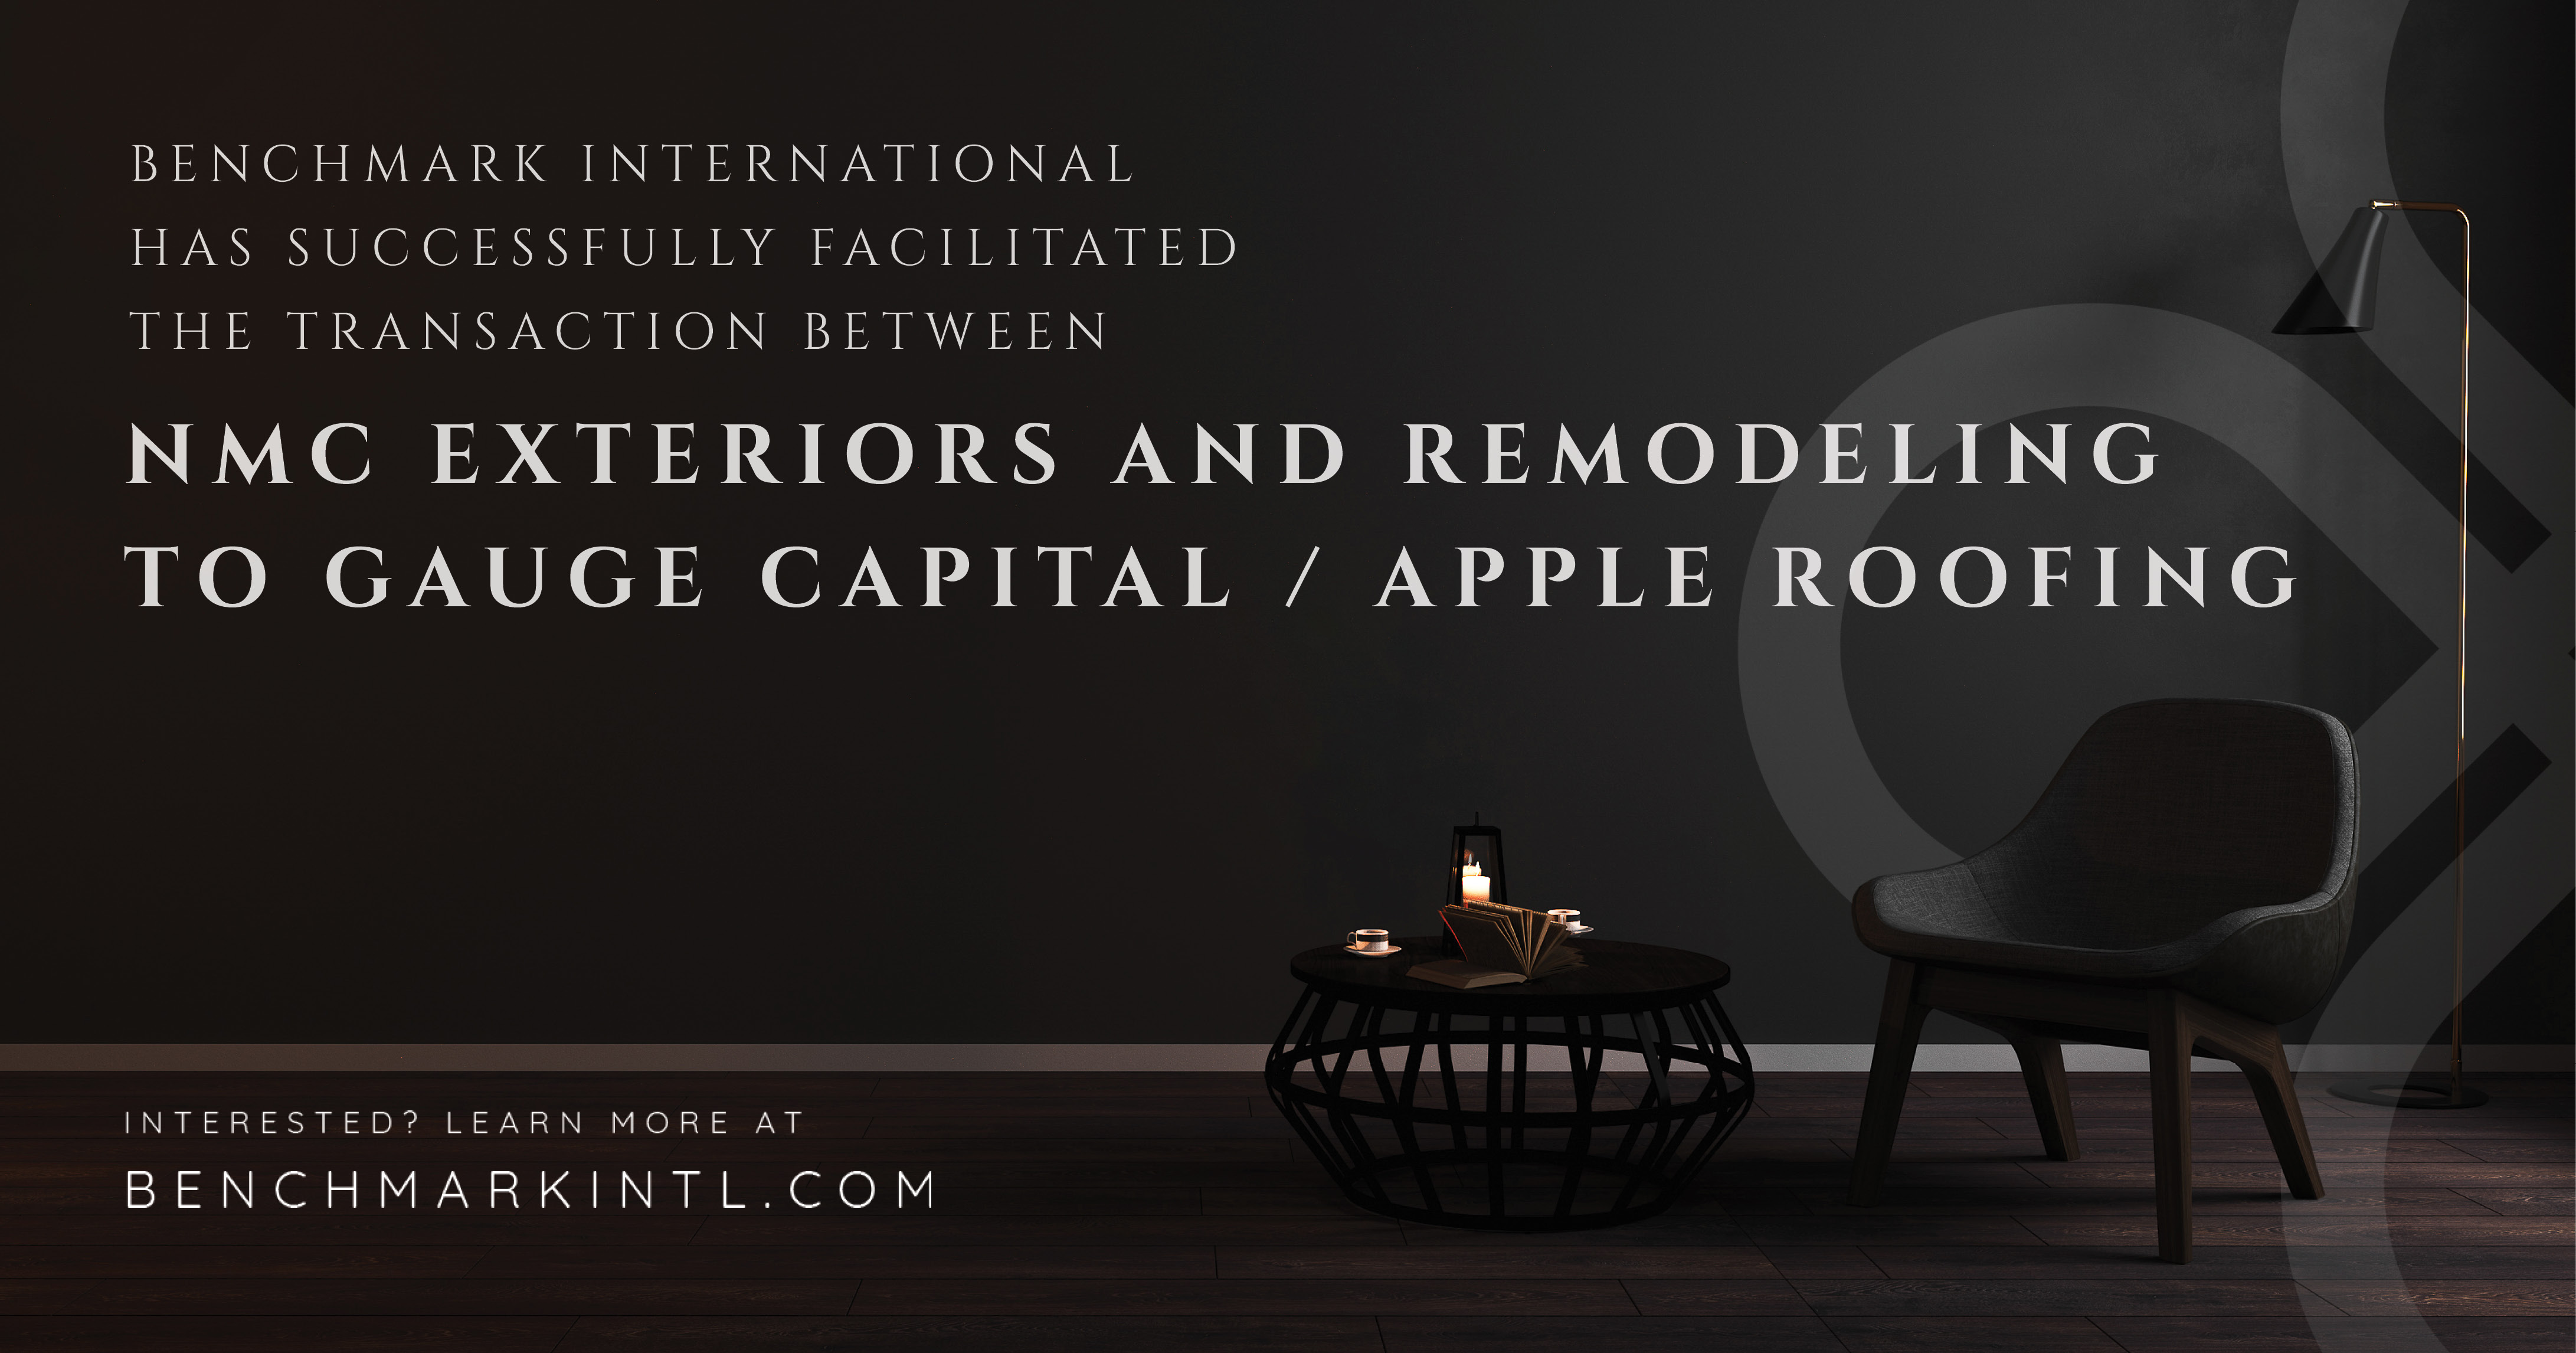 Benchmark International Facilitated the Transaction of NMC Exteriors and Remodeling to Gauge Capital / Apple Roofing